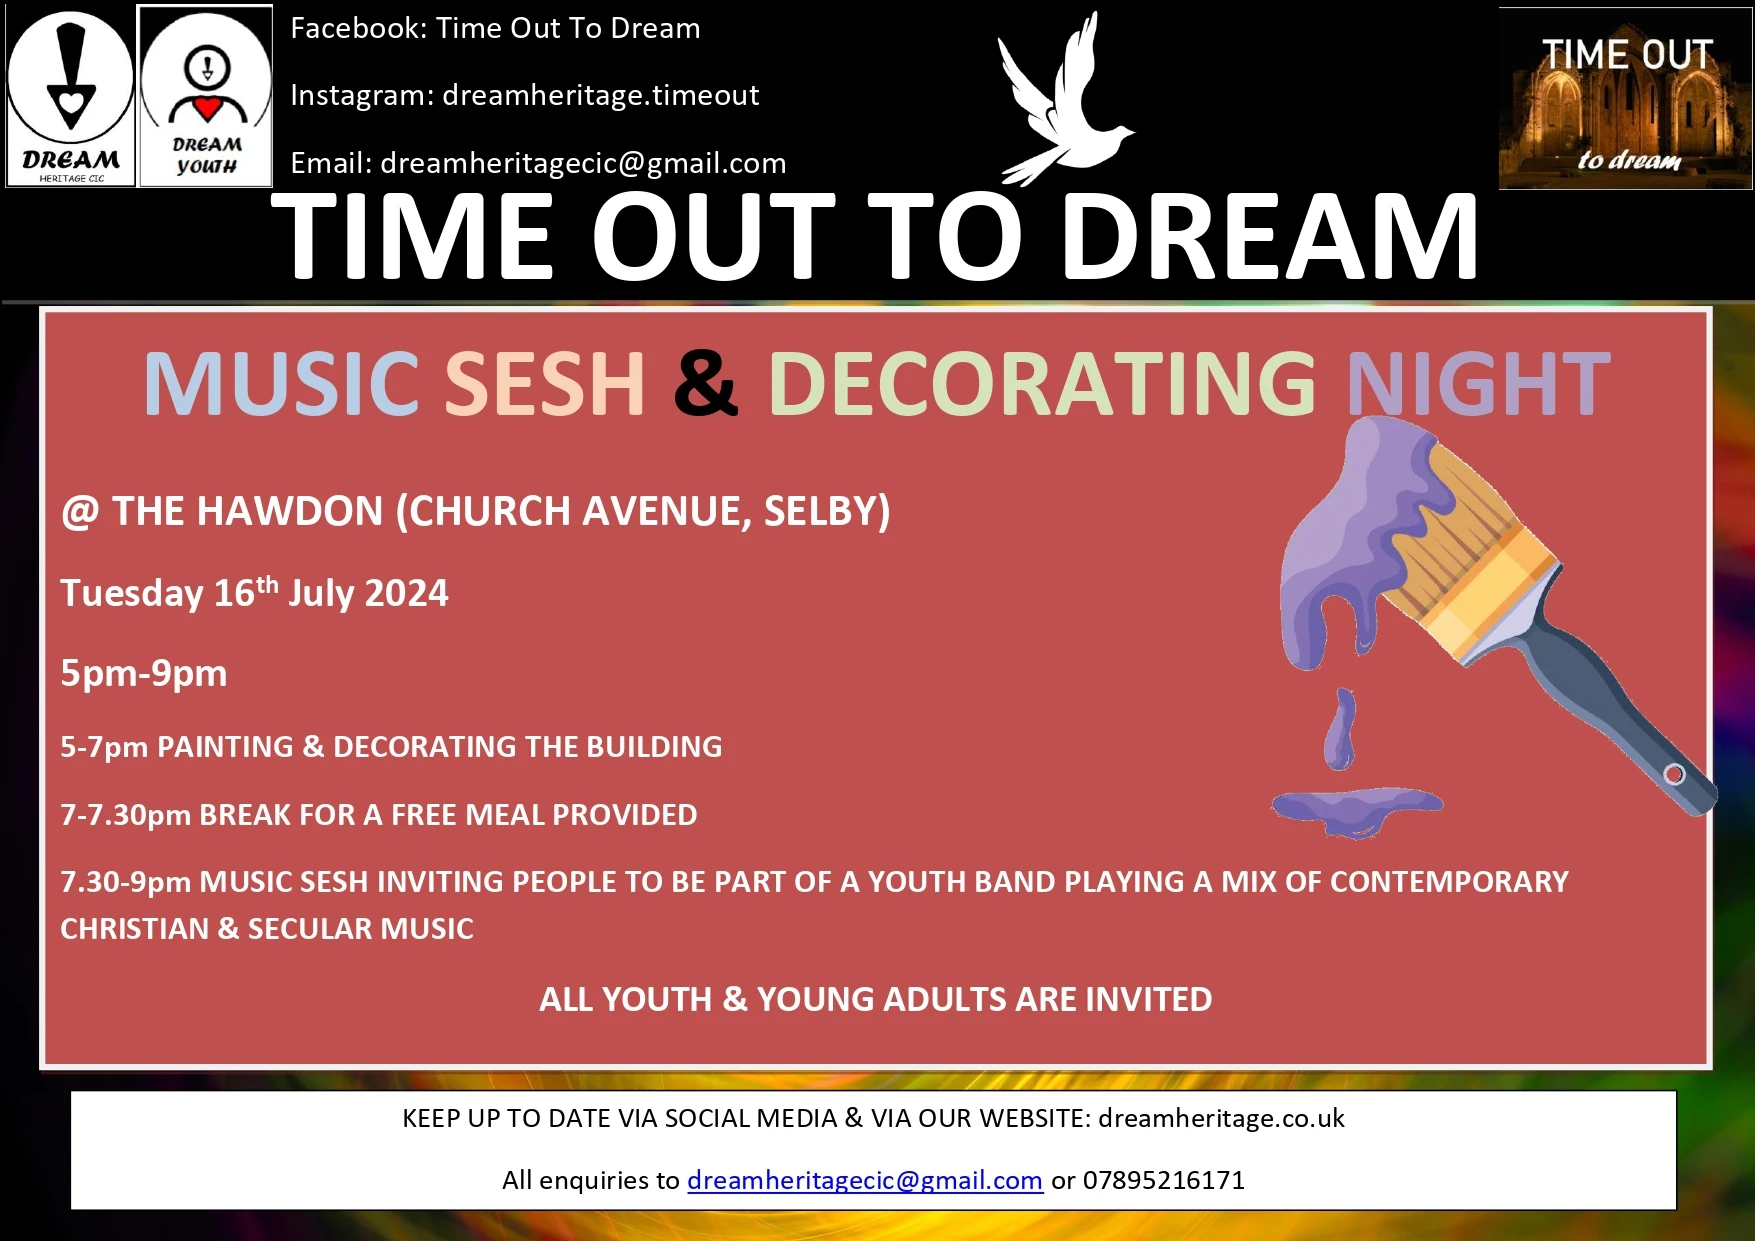 926-16th-july-24-music-sesh-and-painting-time-out-to-dreampage-0001-17206100312537.jpg